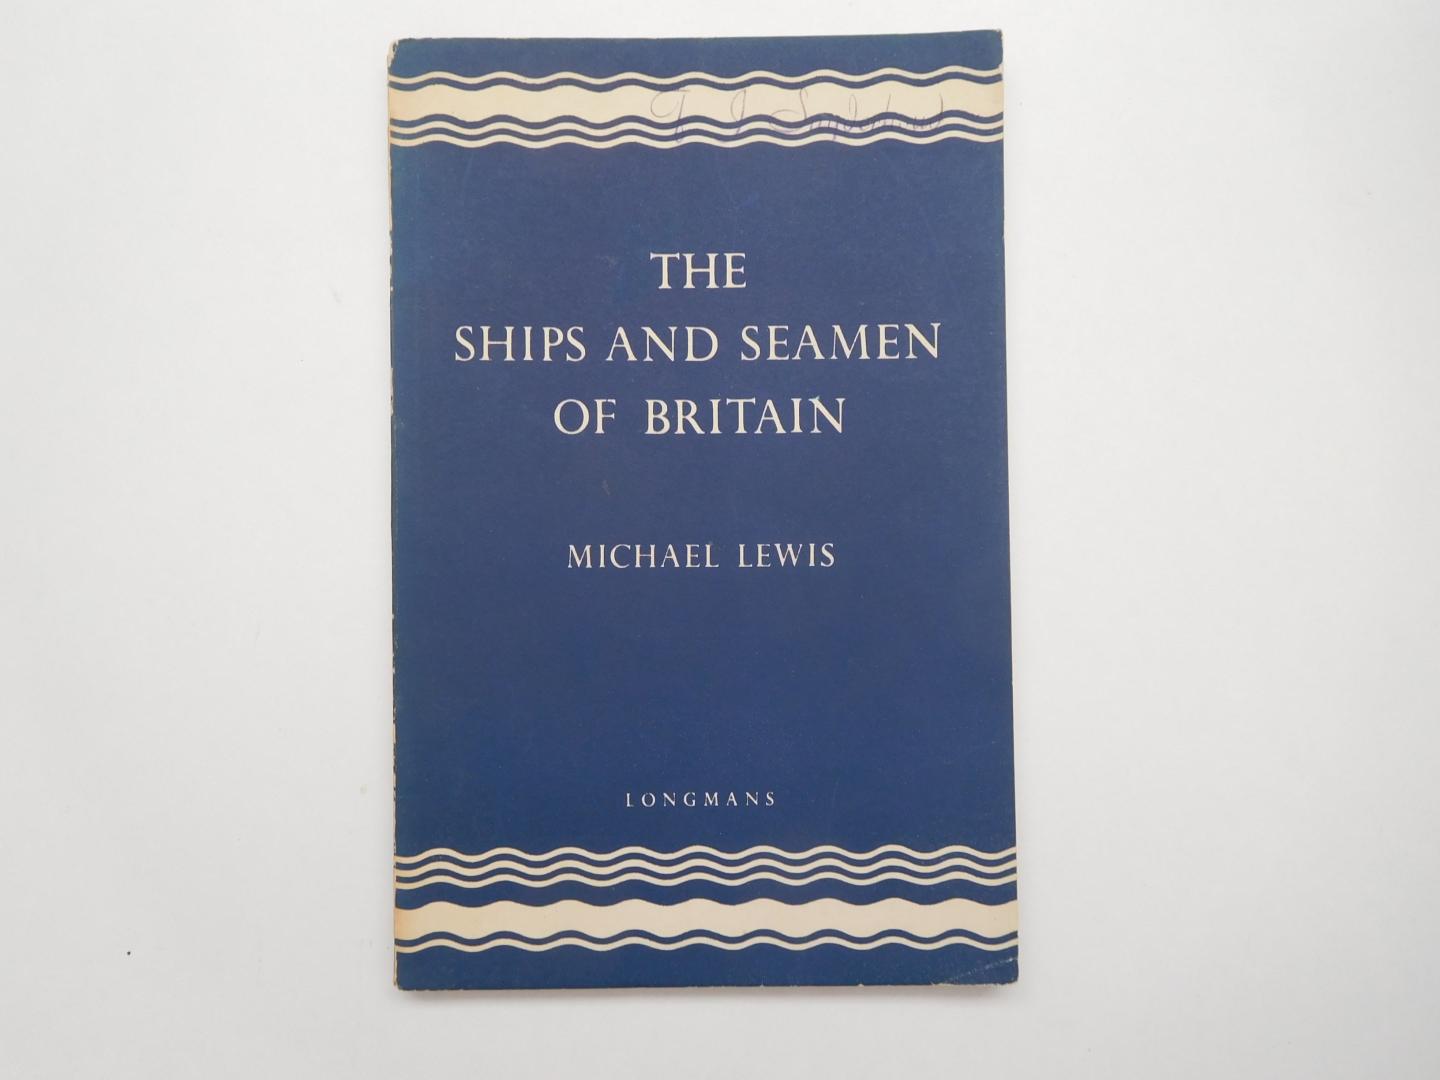 Lewis, Michael - The ships and seamen of Britain